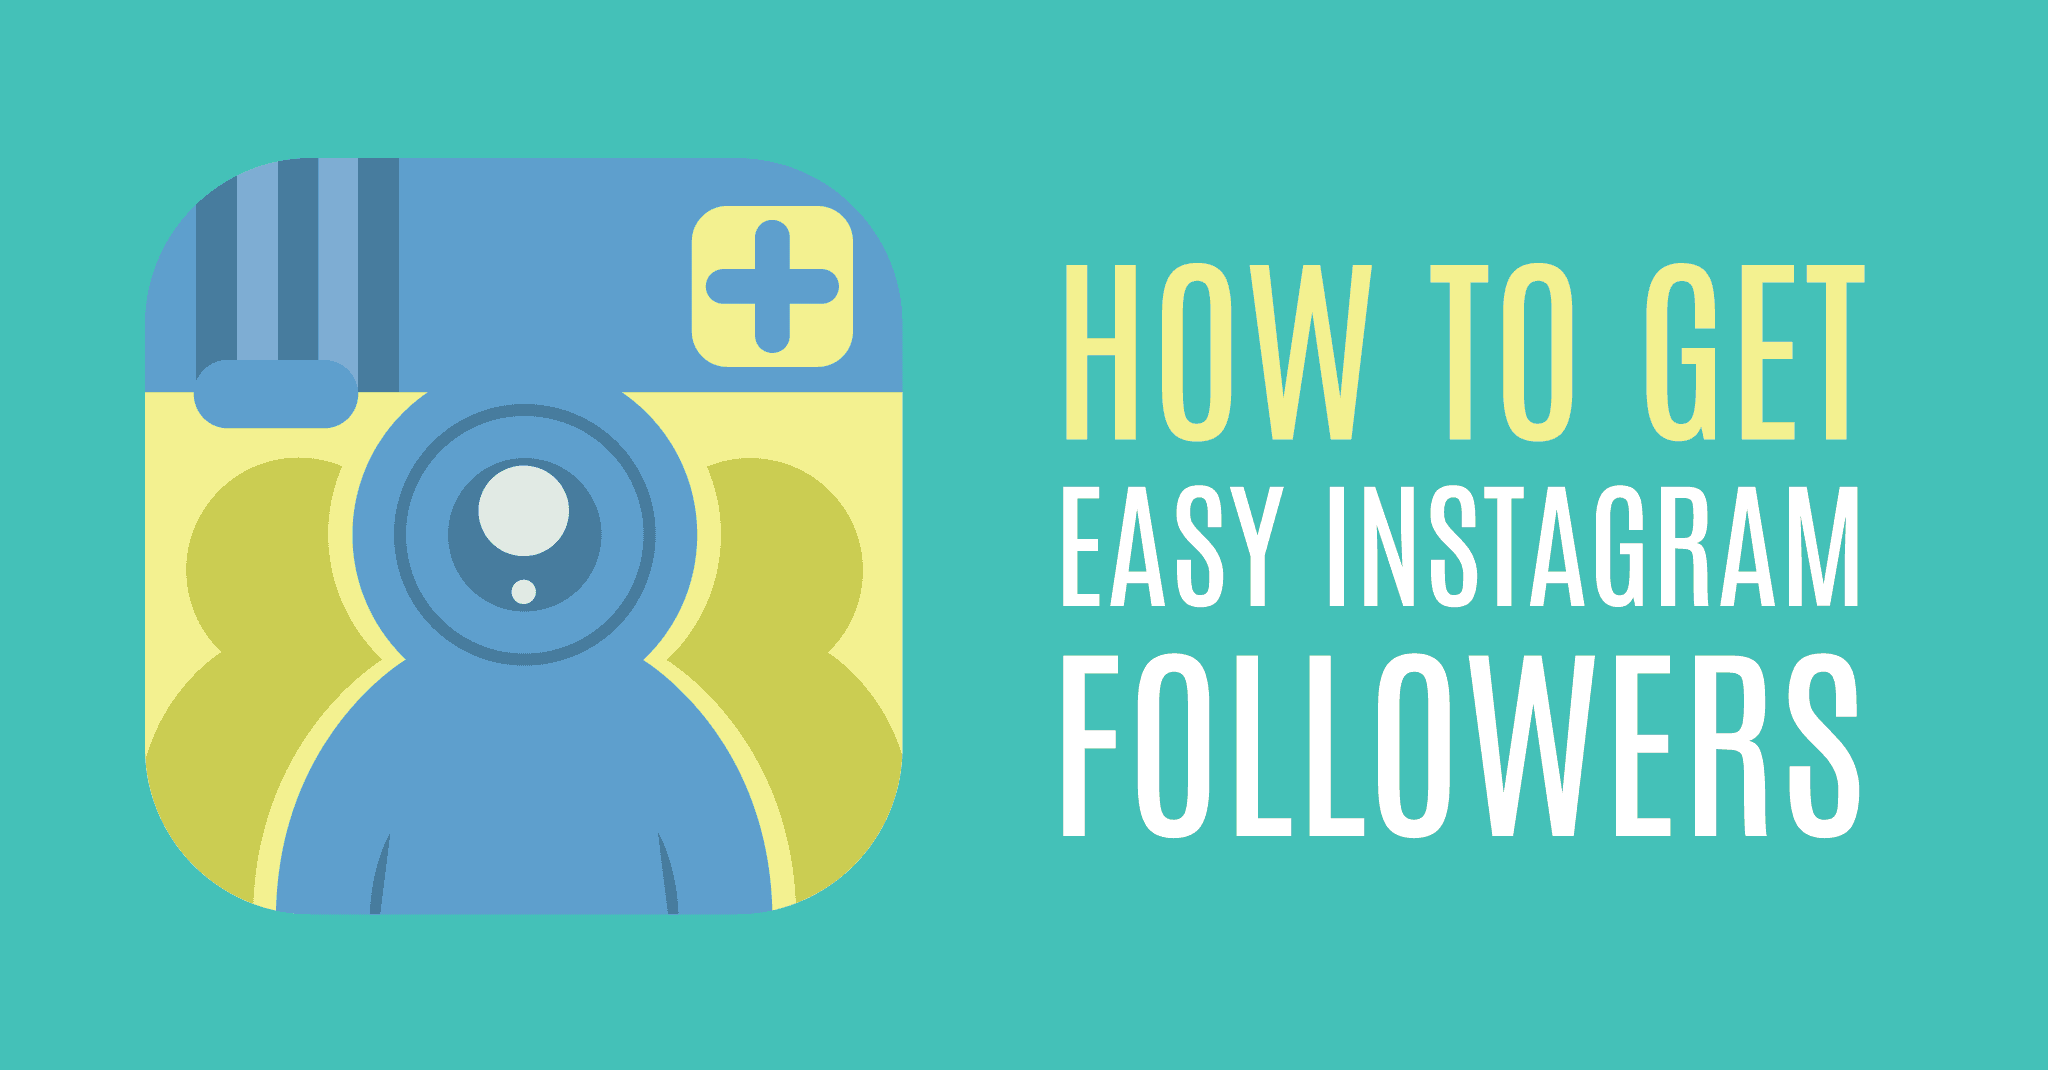 get more instagram followers - the easiest way to get followers on instagram